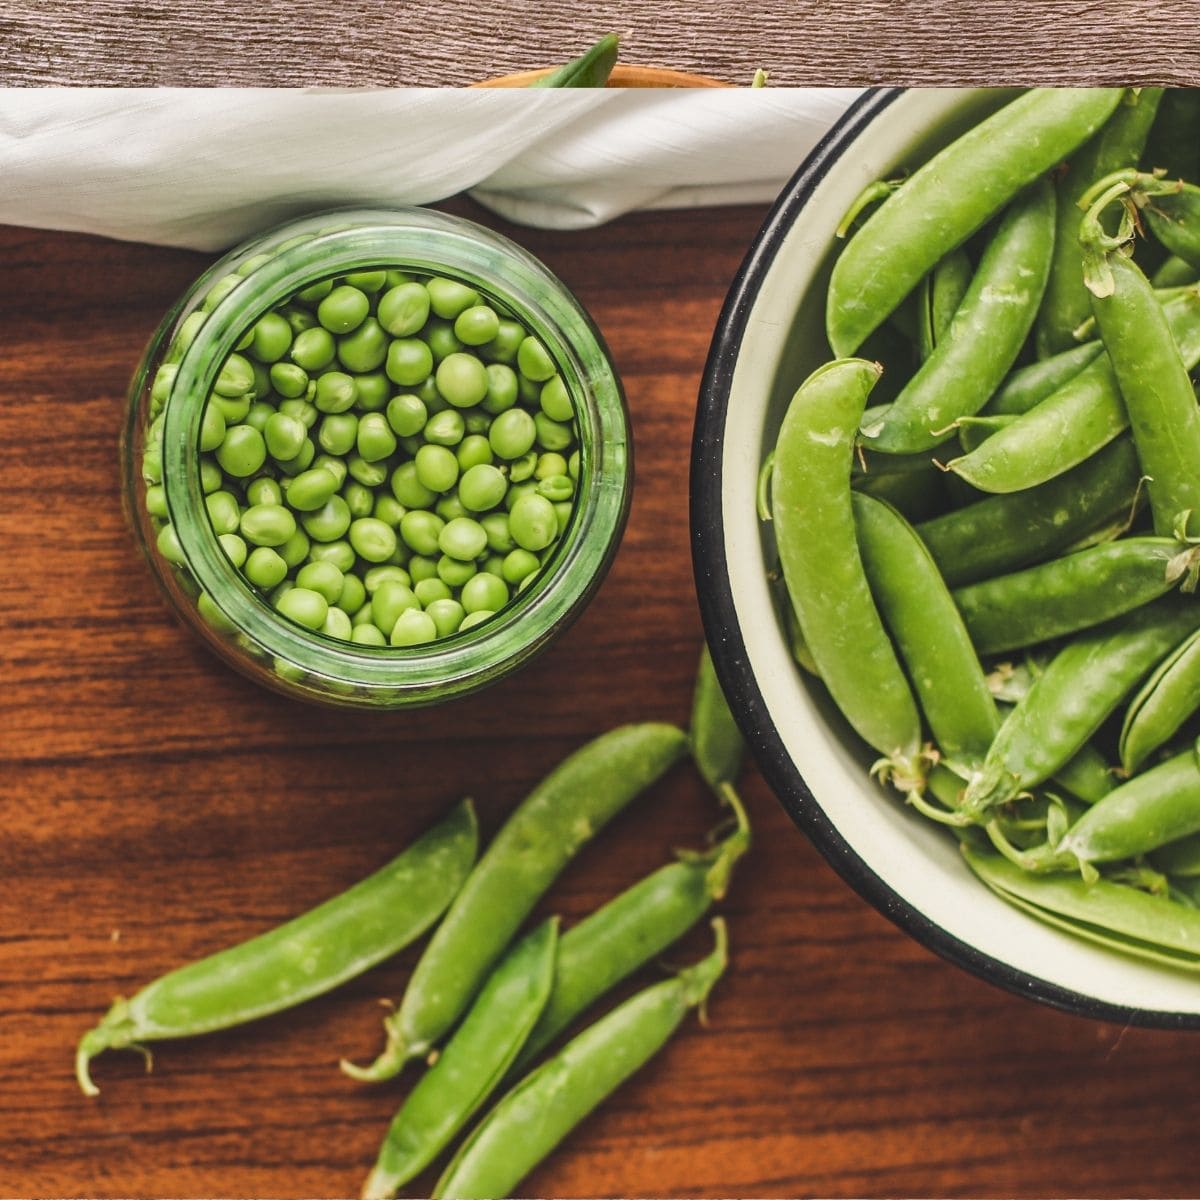 Peas in pods in a bowl and on cutting board, and shelled peas in a jar. 